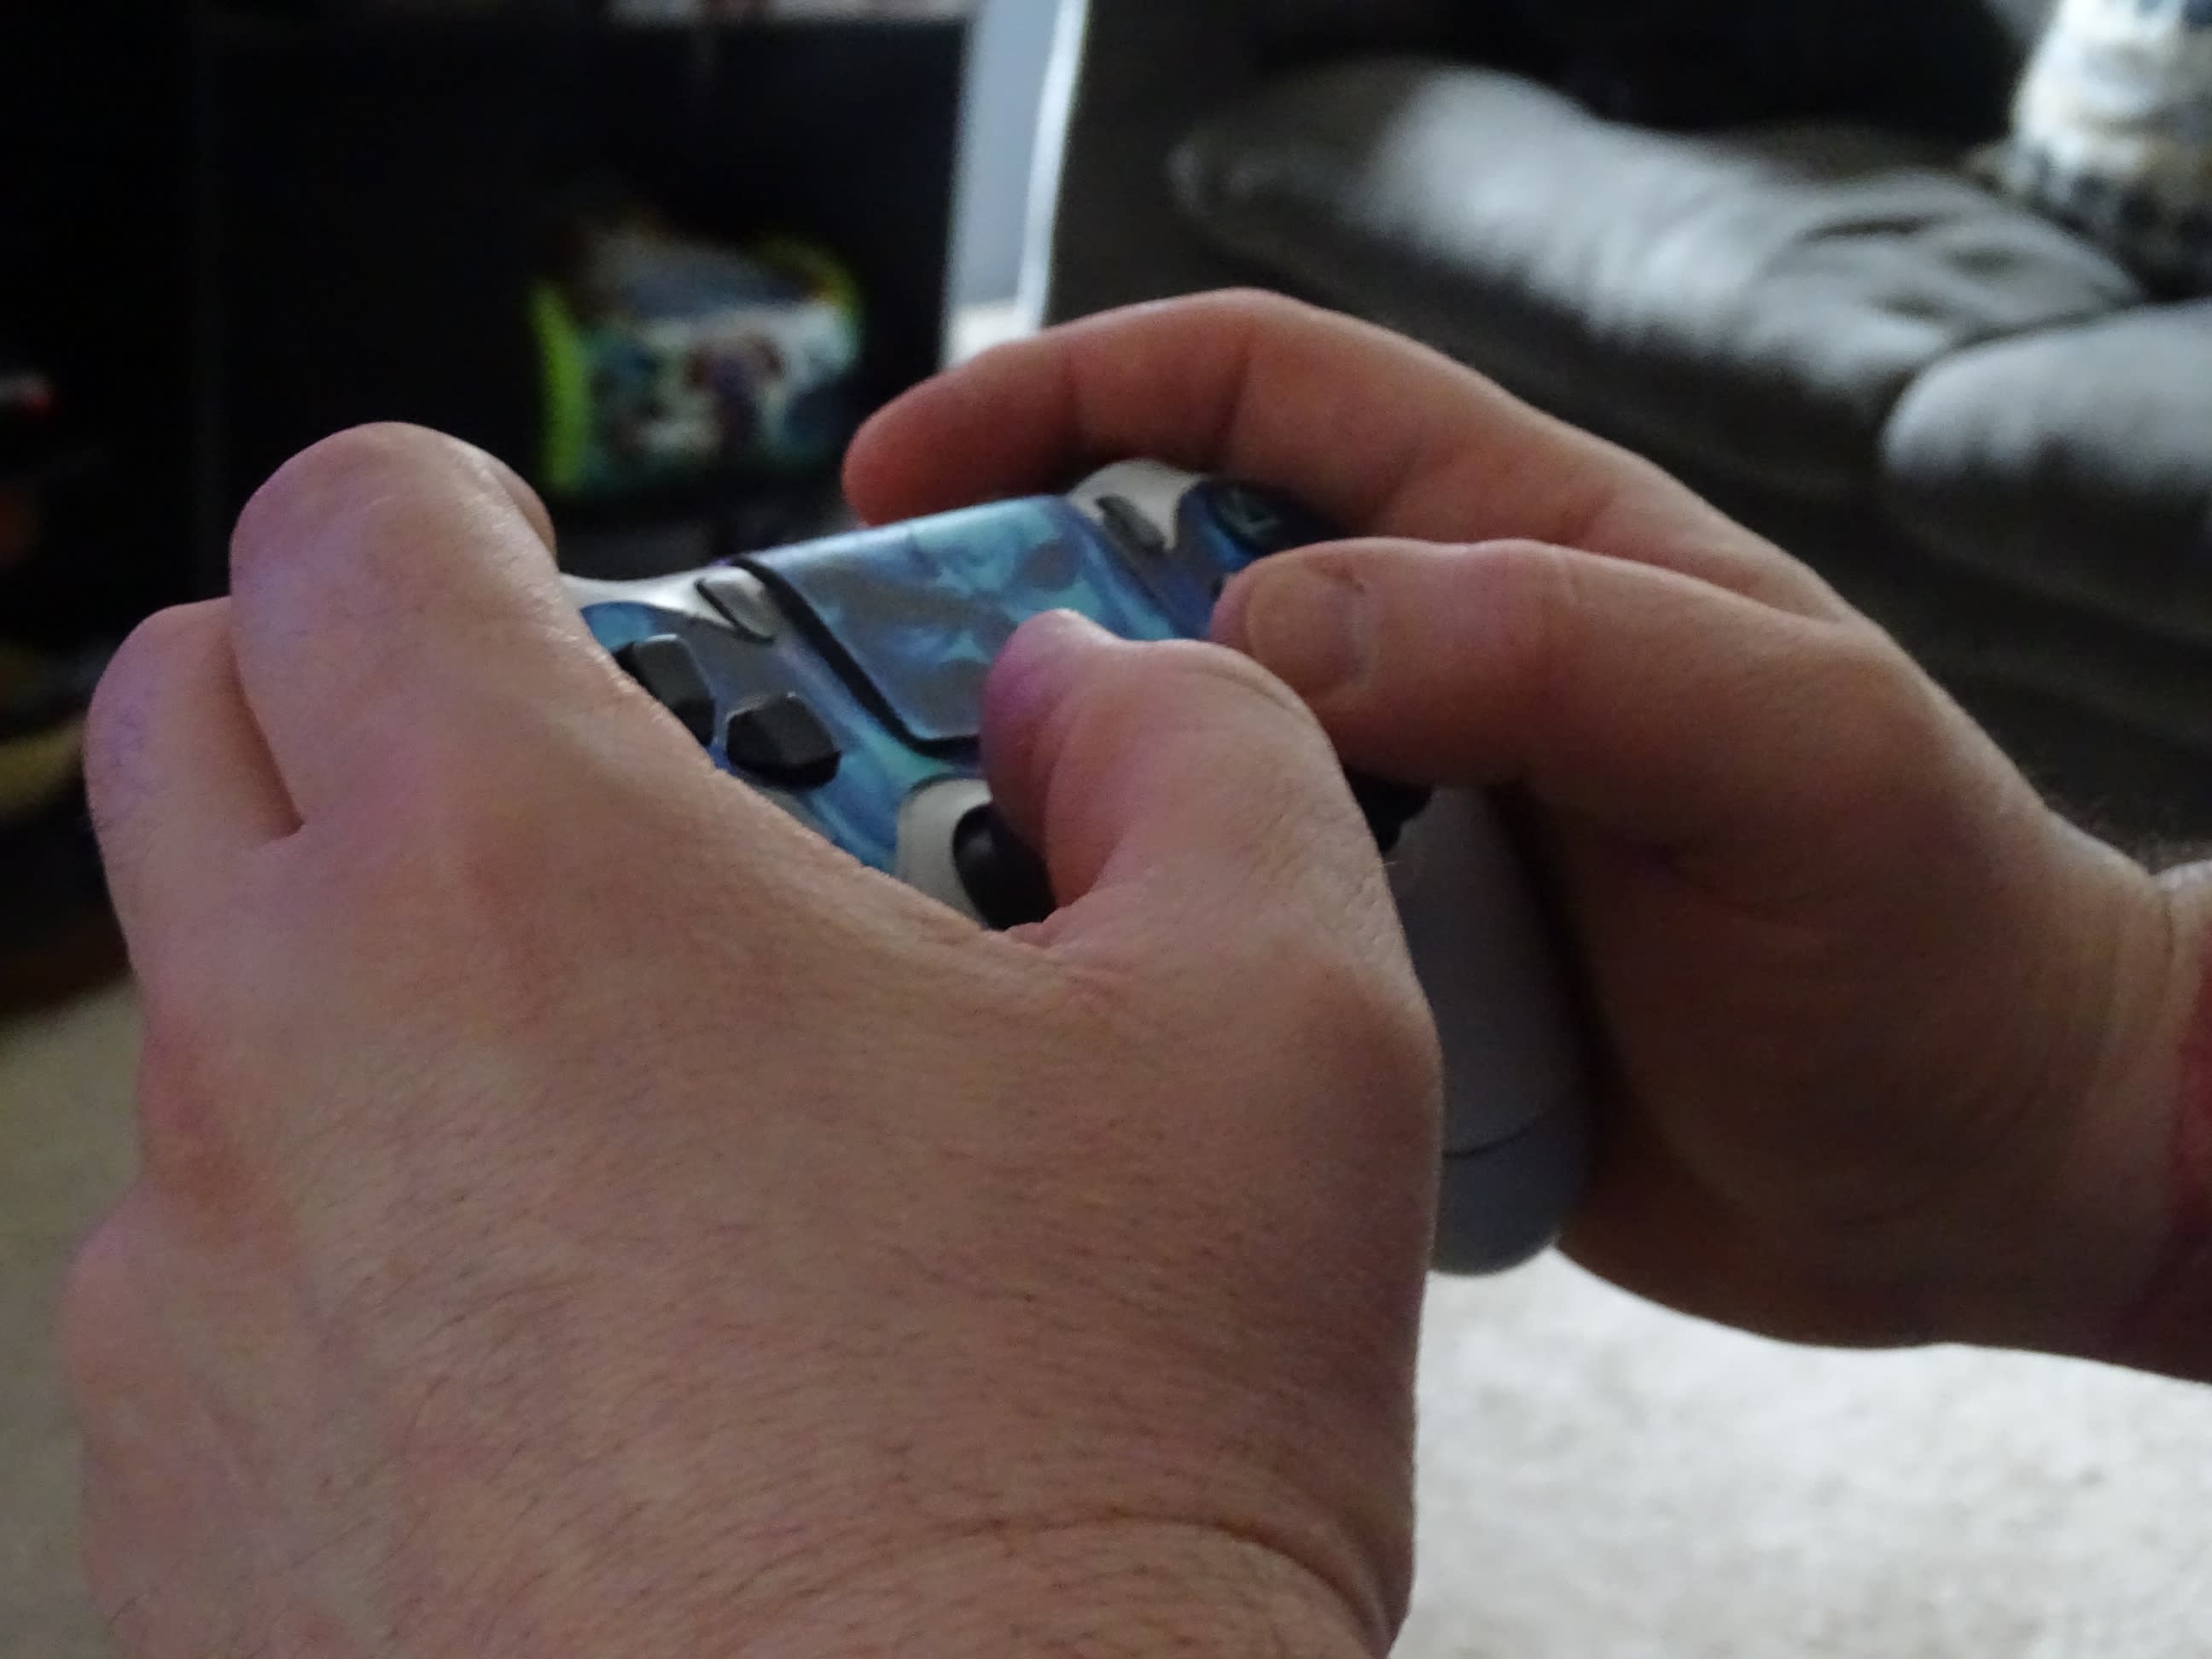 Hands hold a gaming controller.